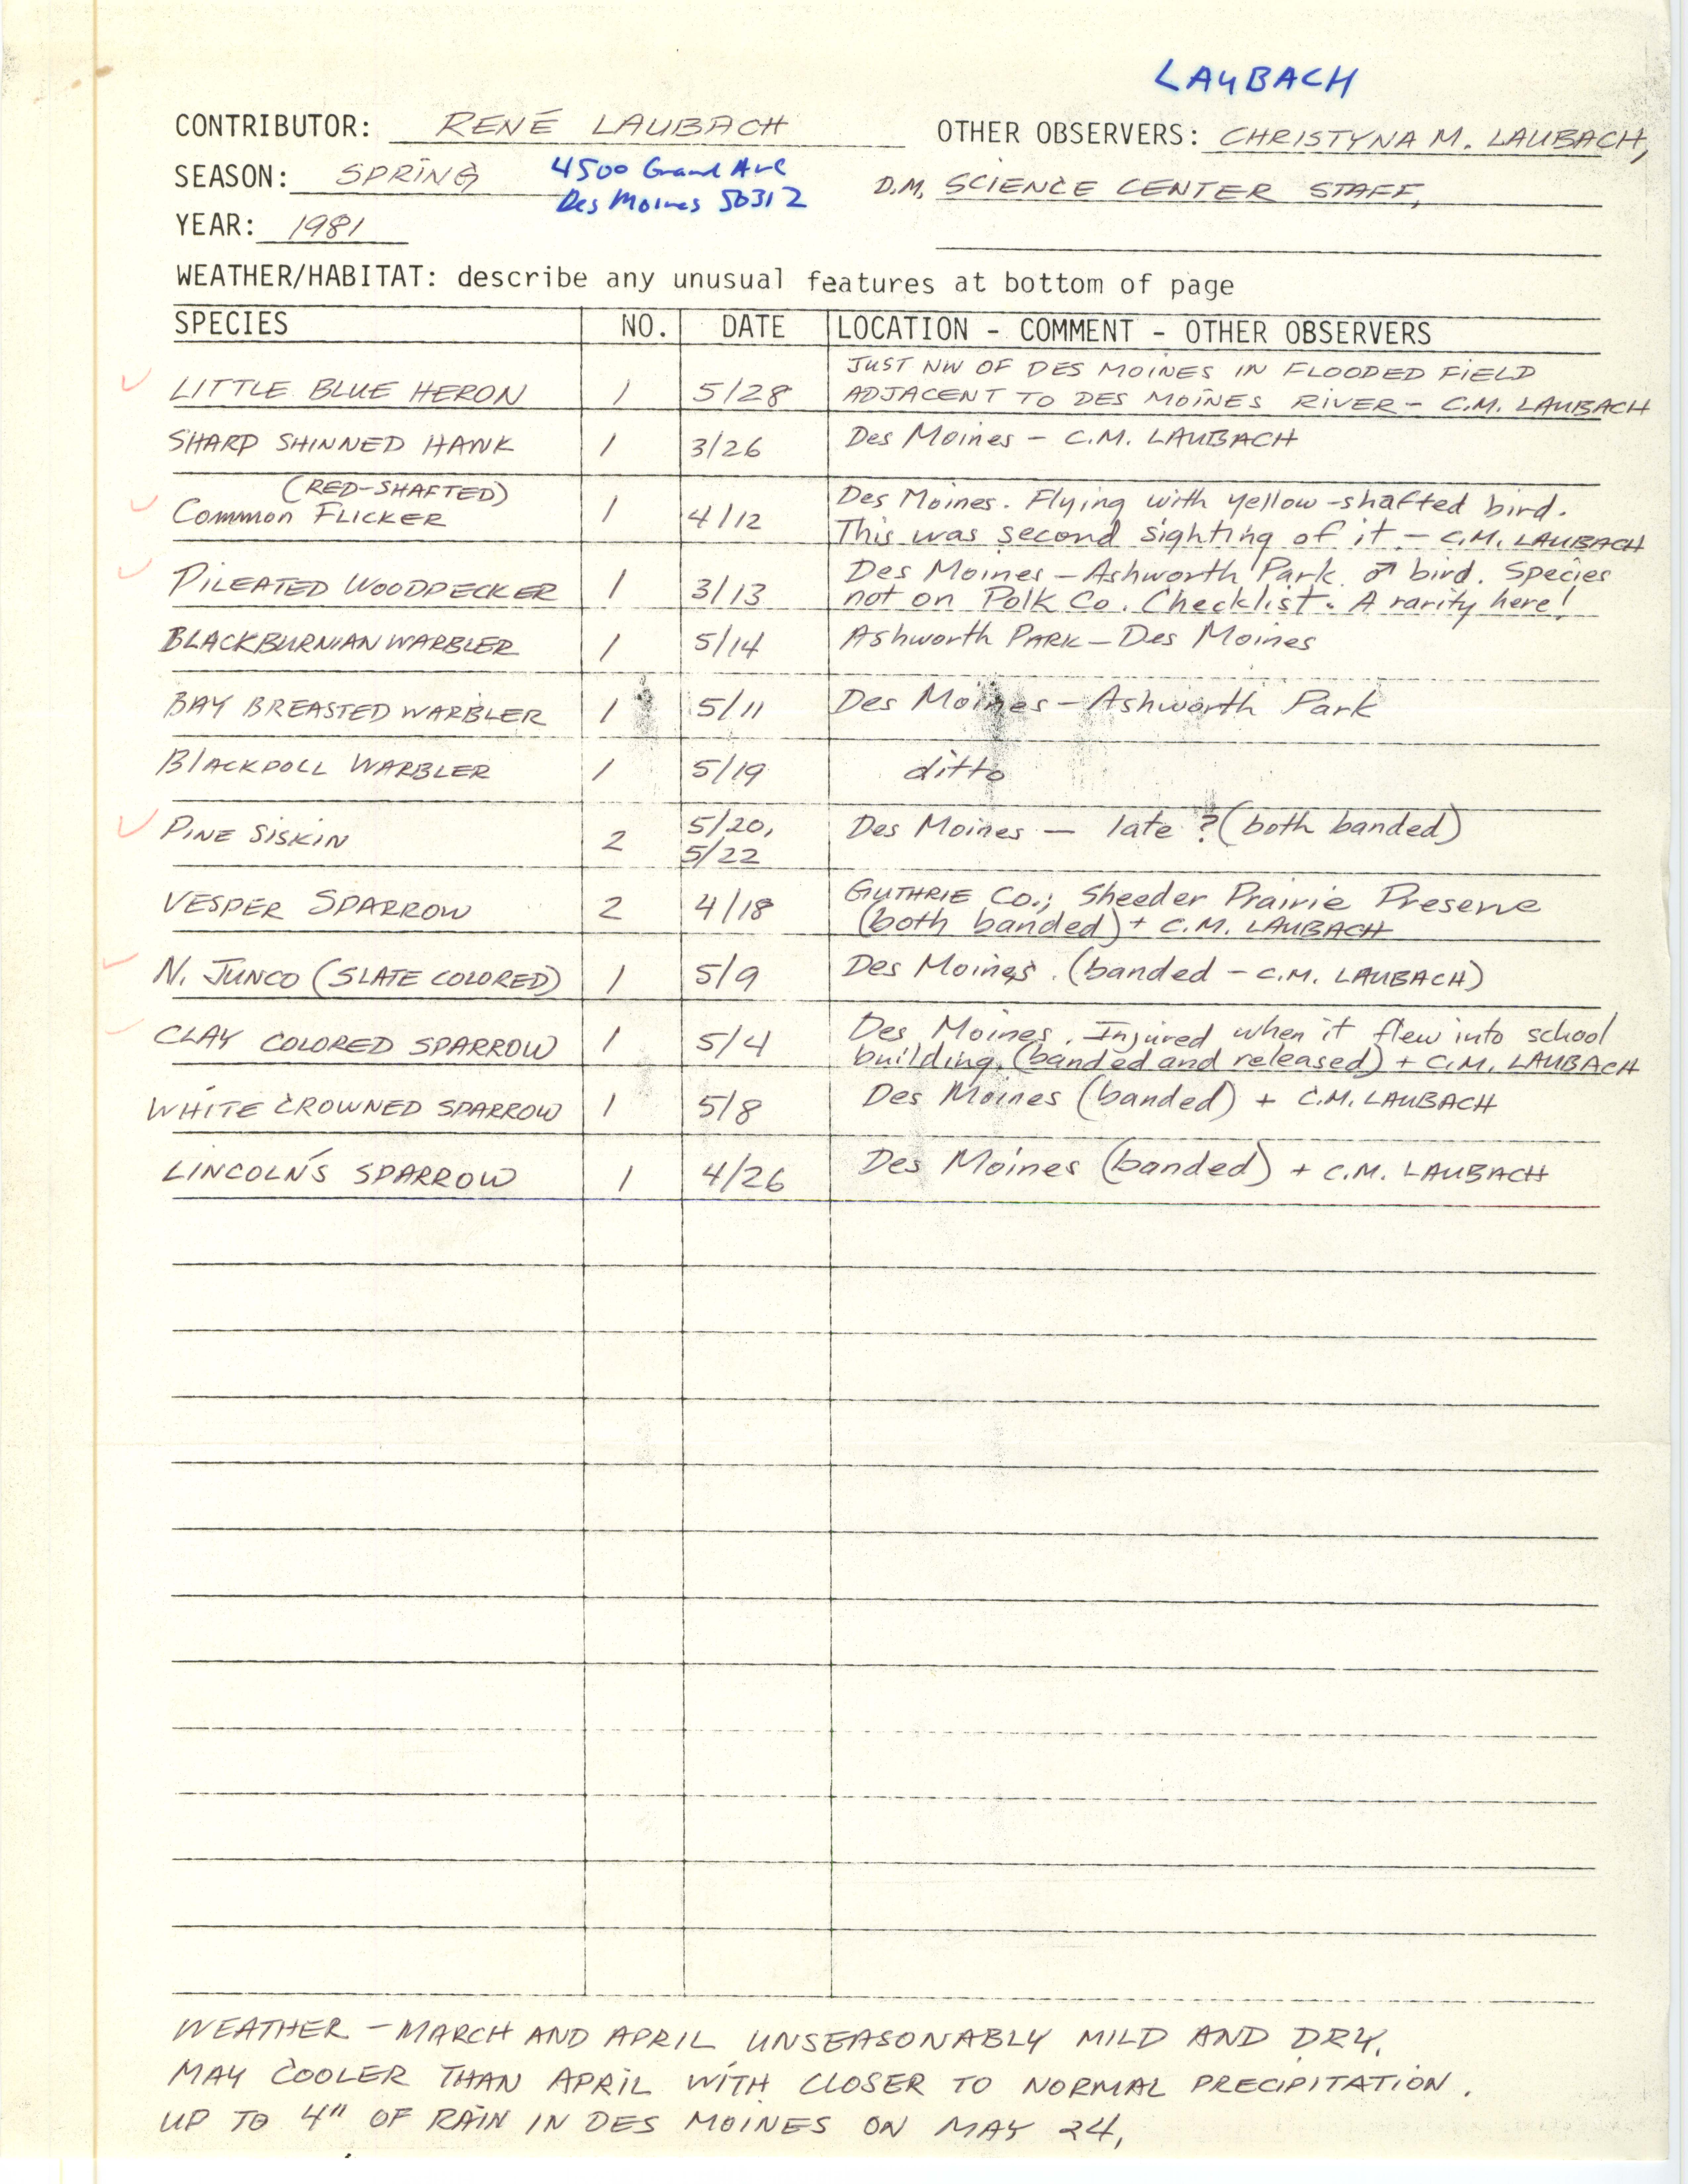 Annotated bird sighting list for spring 1981 compiled by Rene Laubach